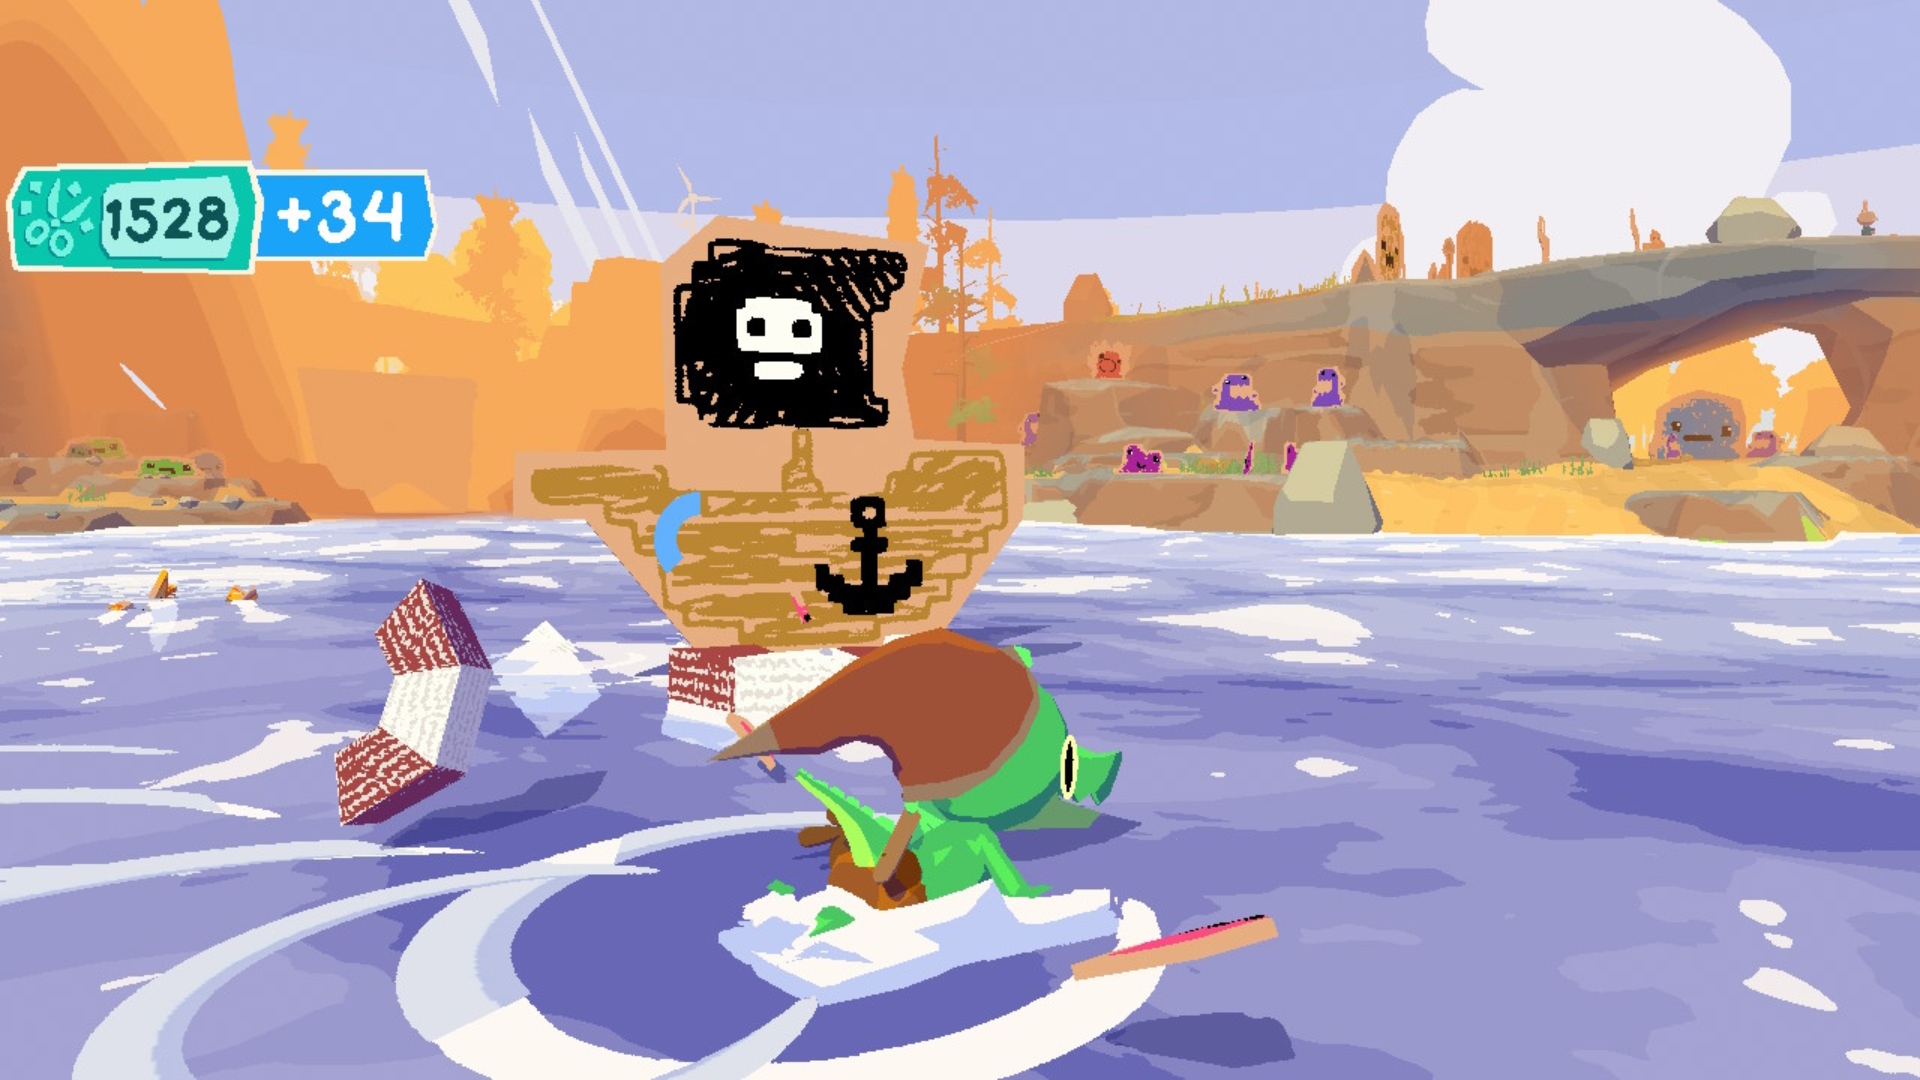 Lil Gator Game review image showing Lil Gator coming up against a cardboard pirate ship in the water.